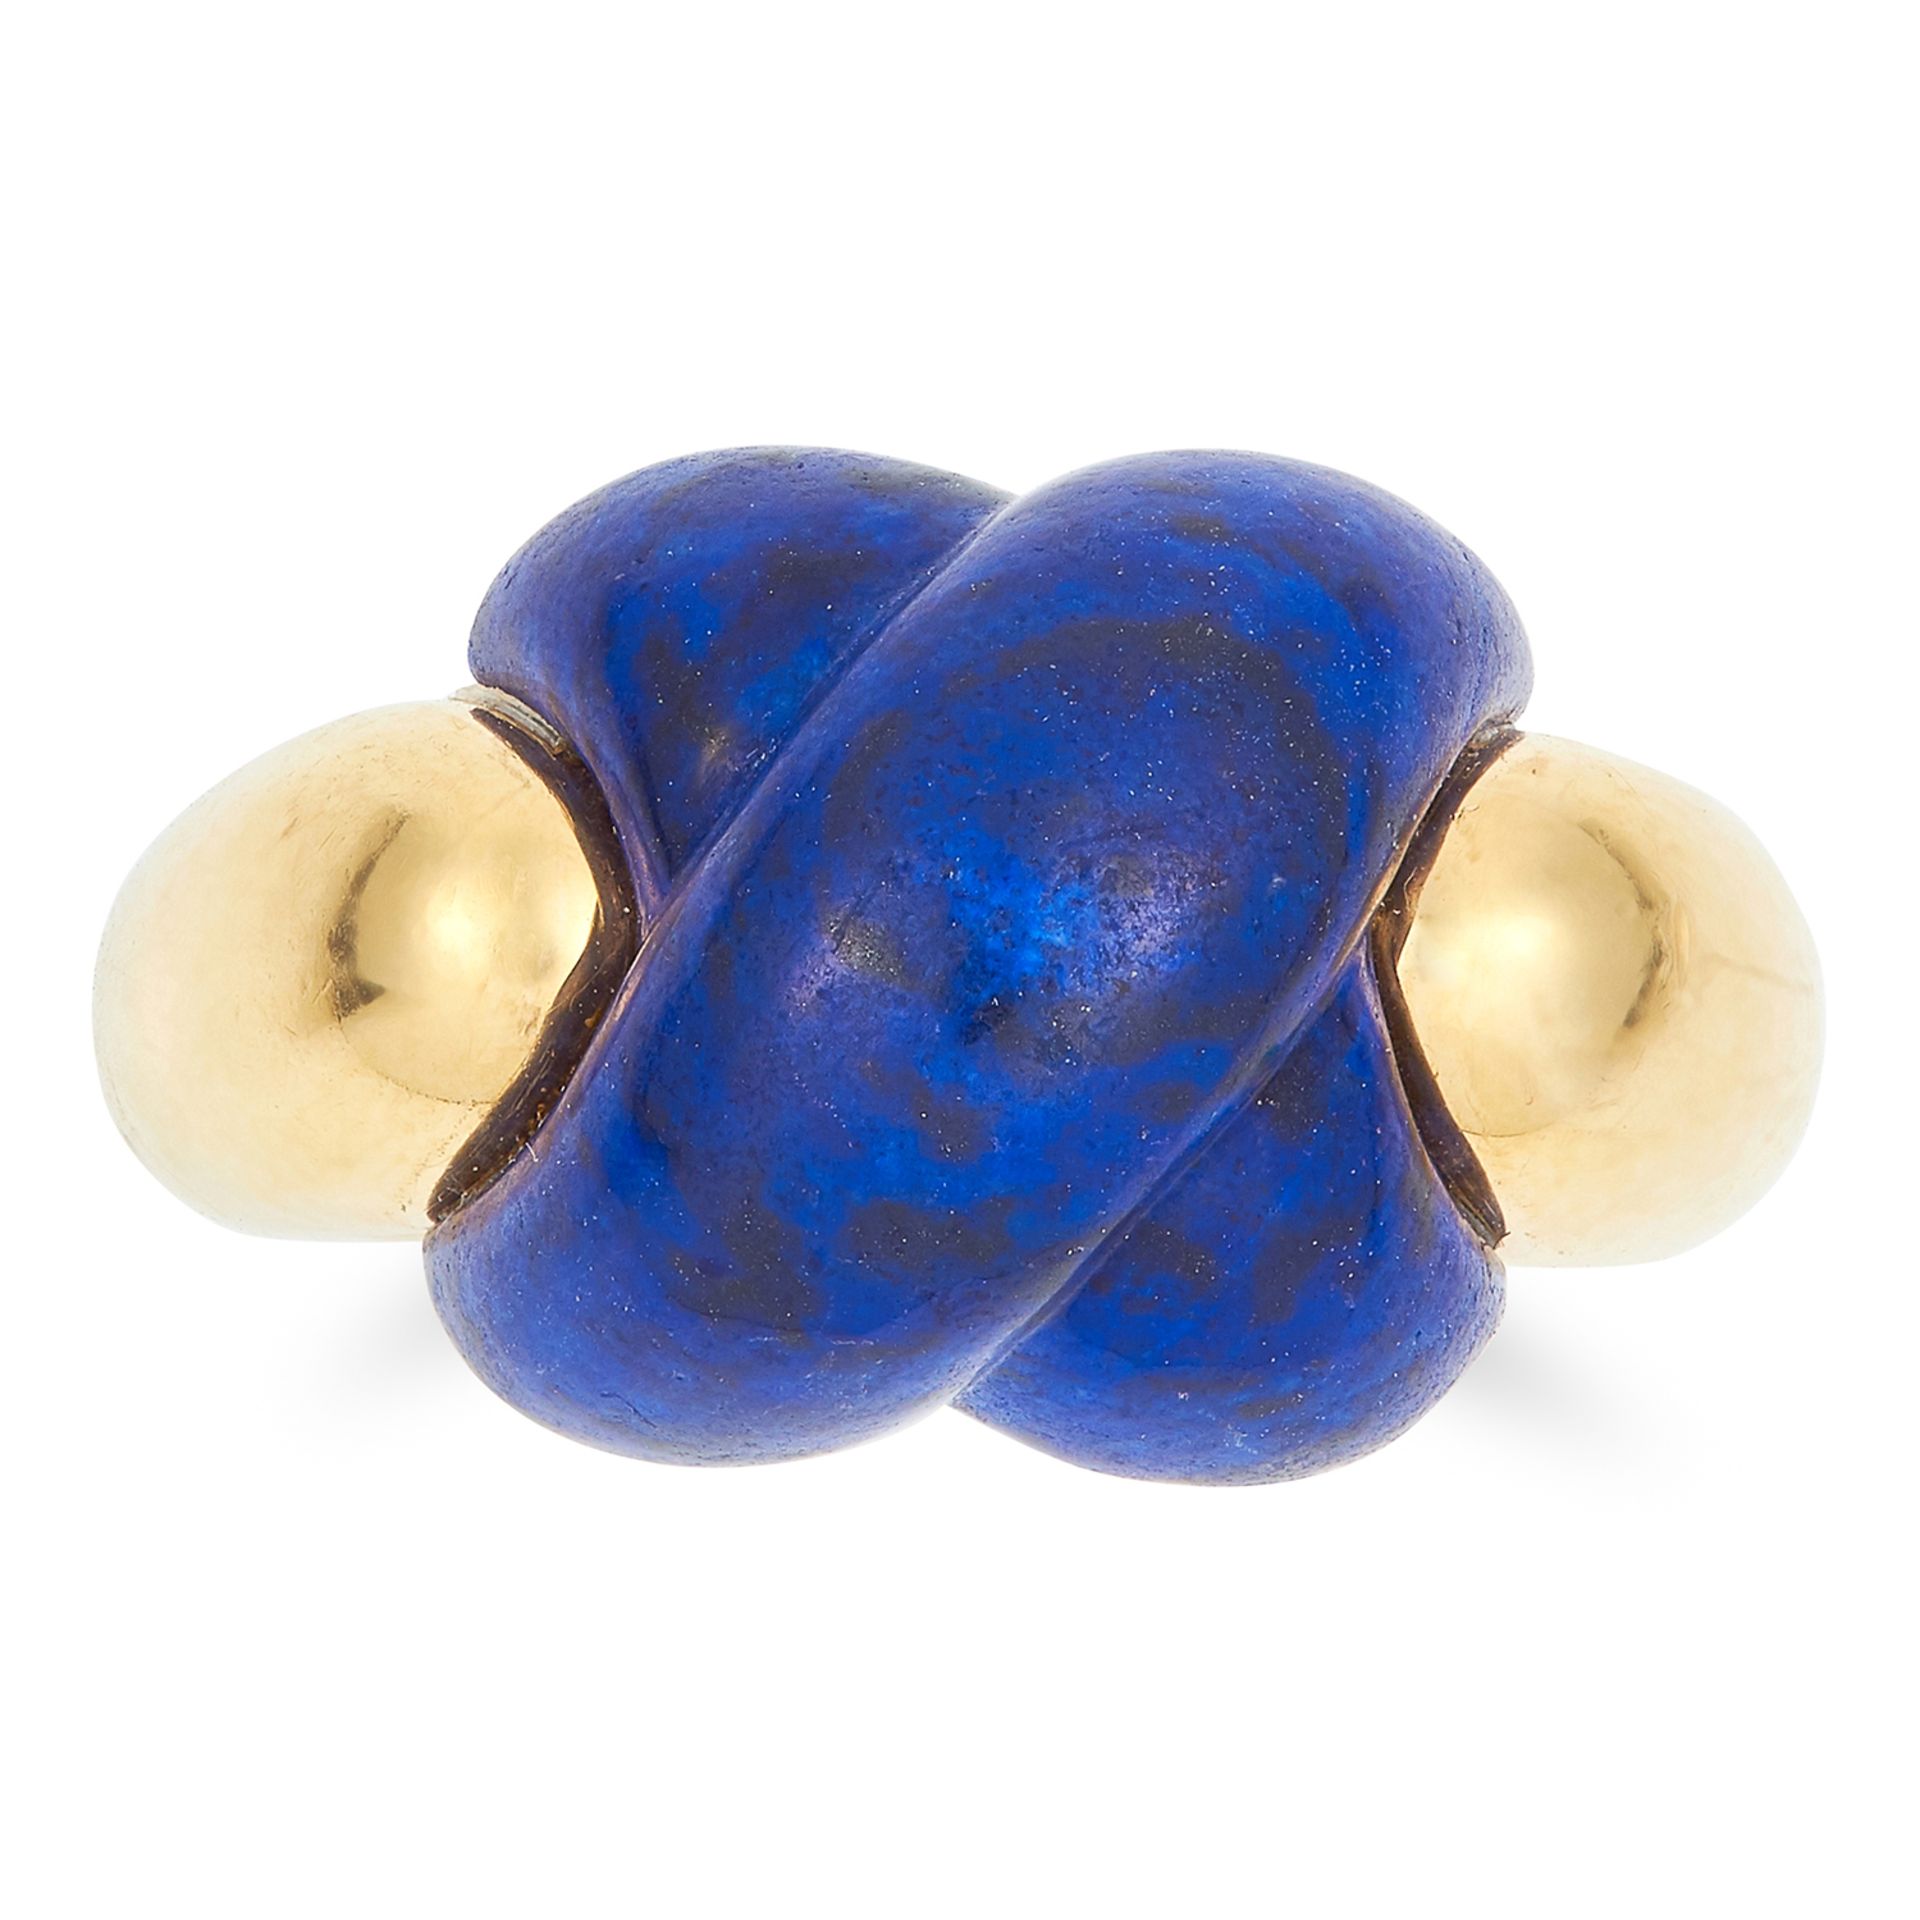 HERMES LAPIS LAZULI DRESS RING, the lapis carved in knot formation, size L / 6, 7.5g.